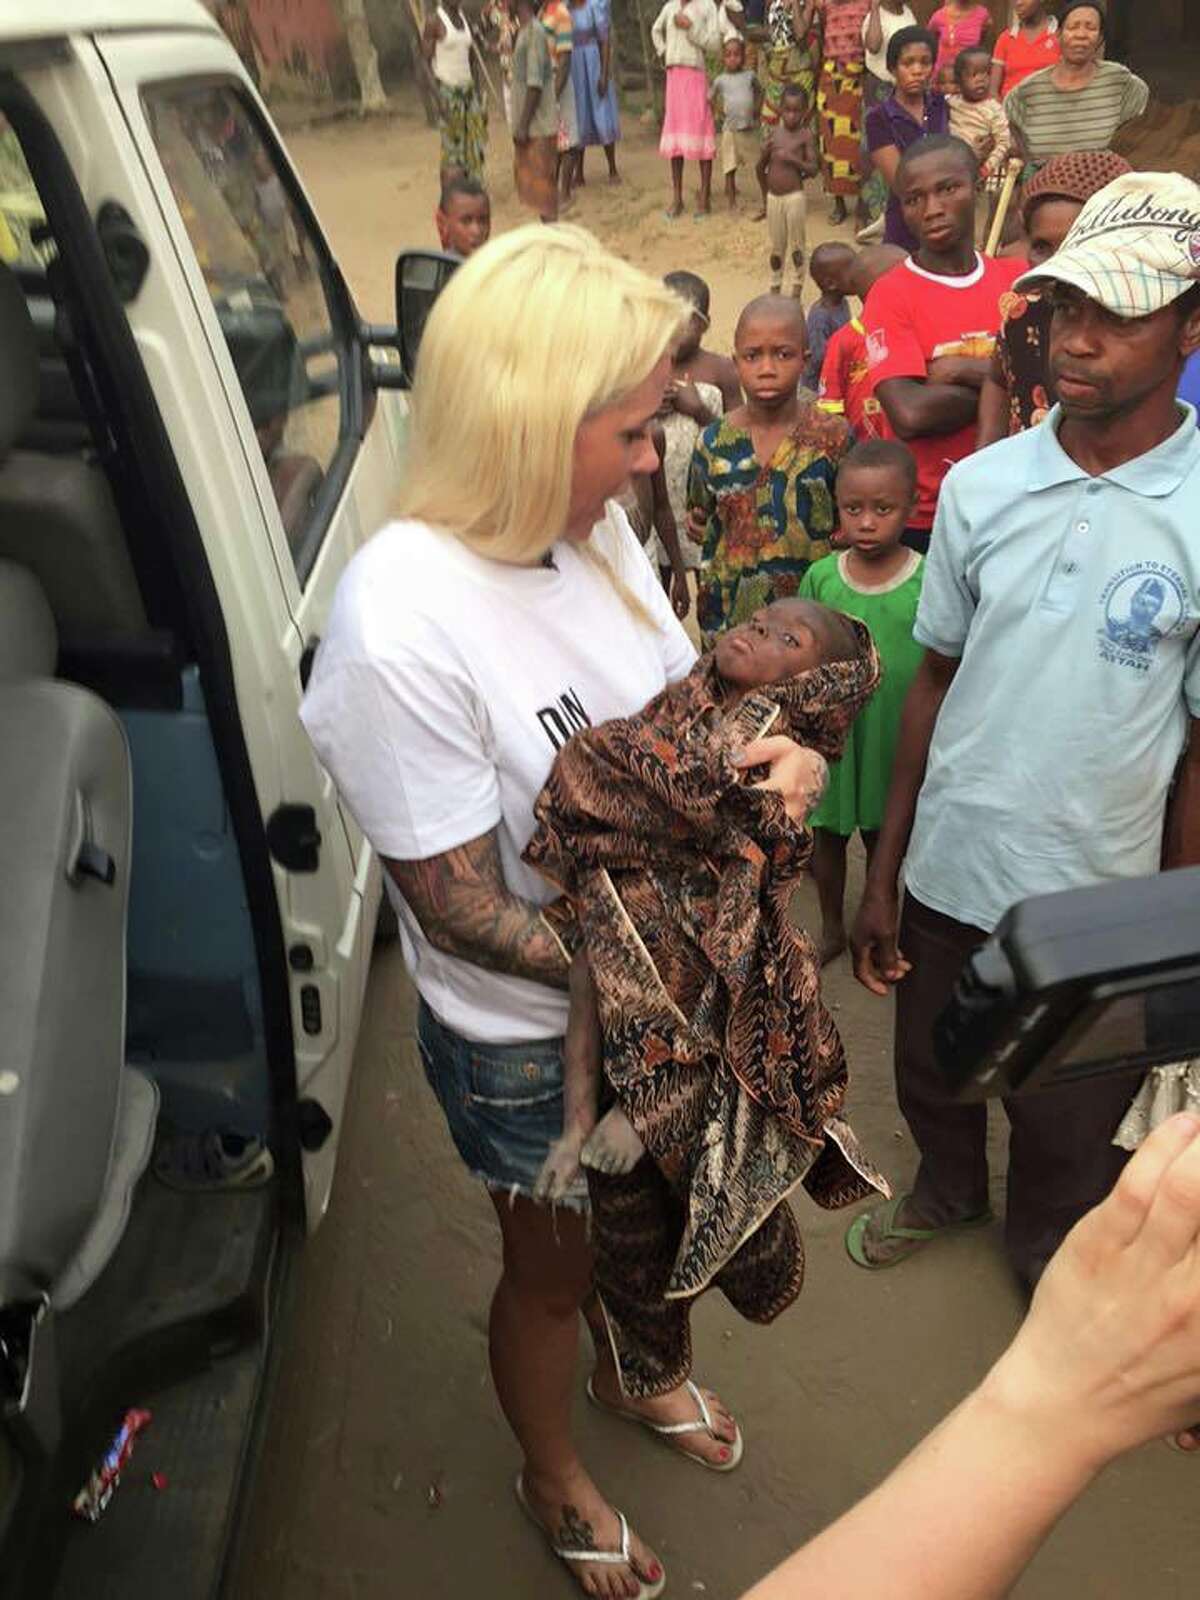 Anja Ringgren Lovén, the Danish founder of the African Children's Aid Education and Development Foundation, rescues a starving Nigerian child after he was labeled a witch by his community and abandoned by his parents. Warning: The following images are distressing. 